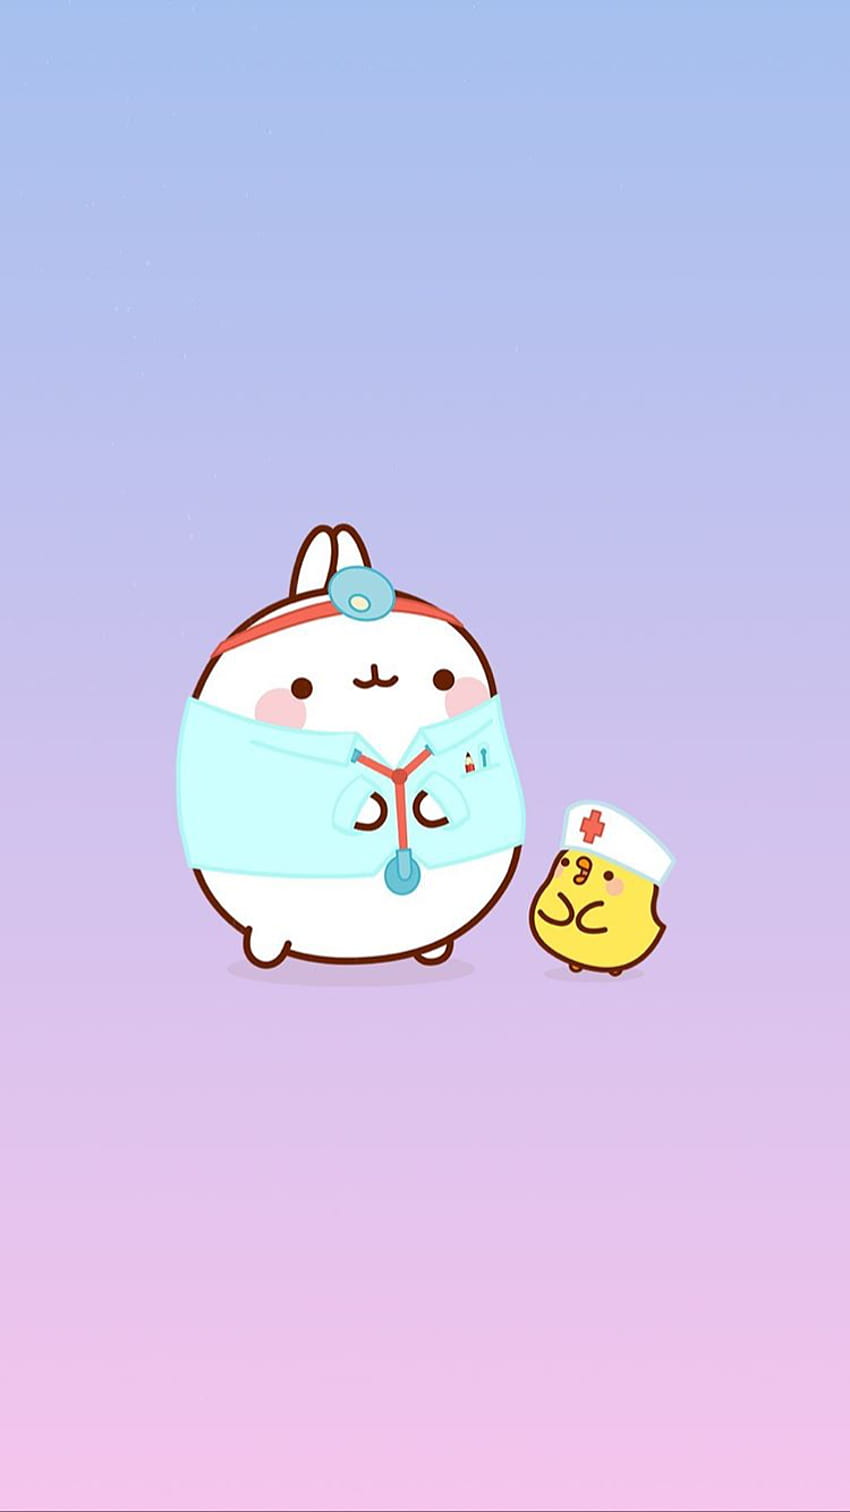 Molang wallpaper by DESSA72  Download on ZEDGE  d791